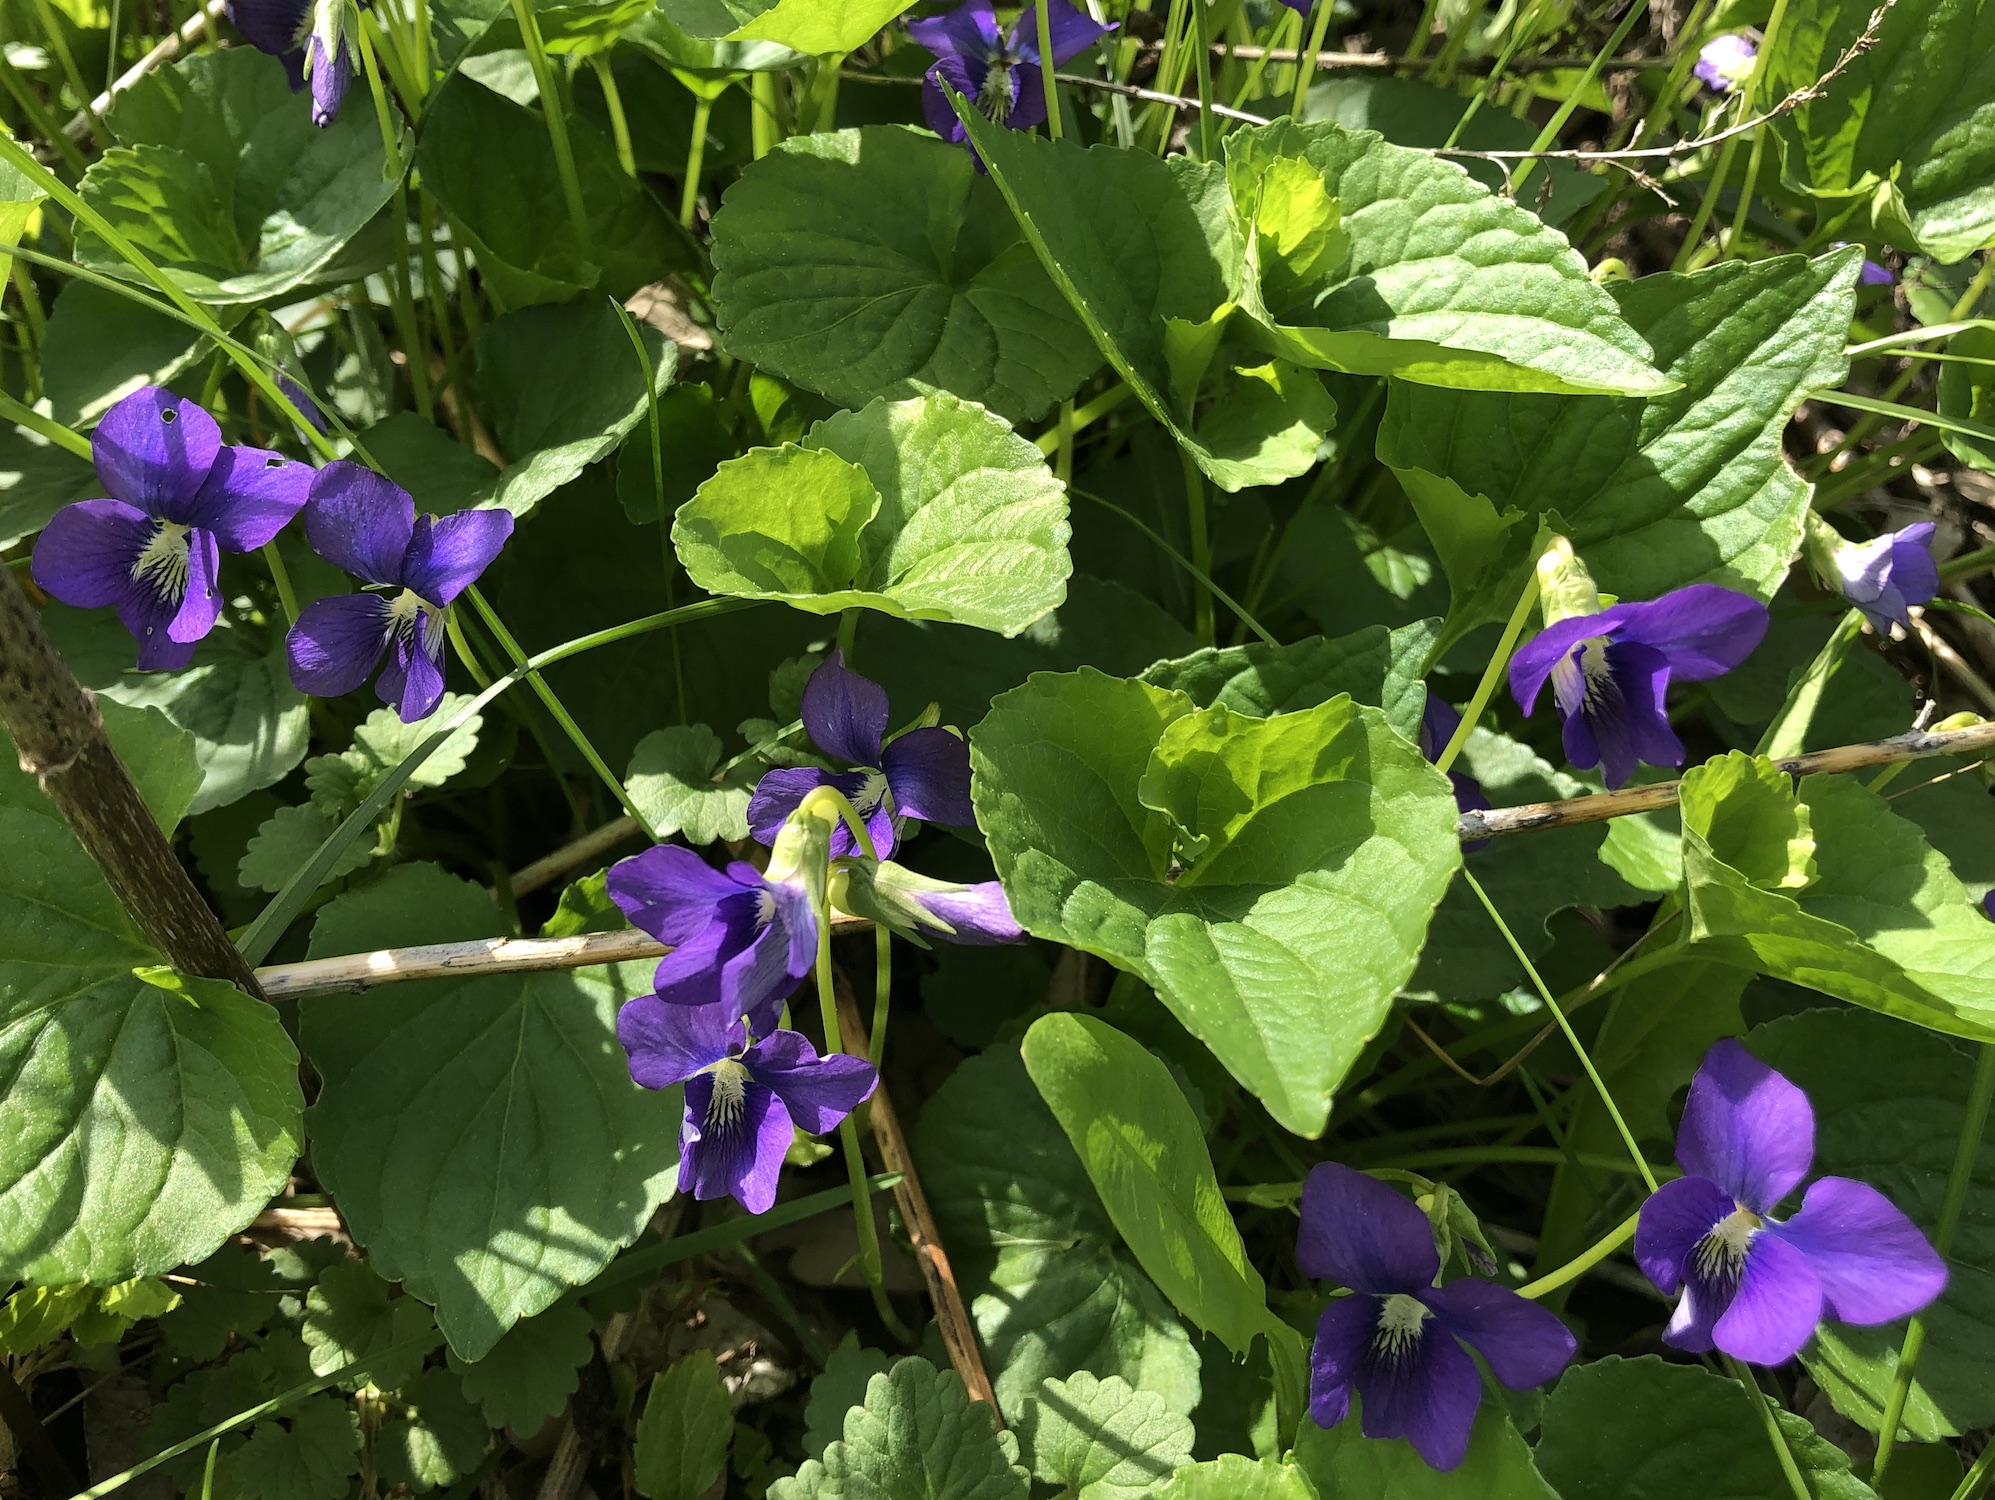 Wood Violets near Council Ring, the Oak Savanna and the Duck Pond on May 7, 2019.